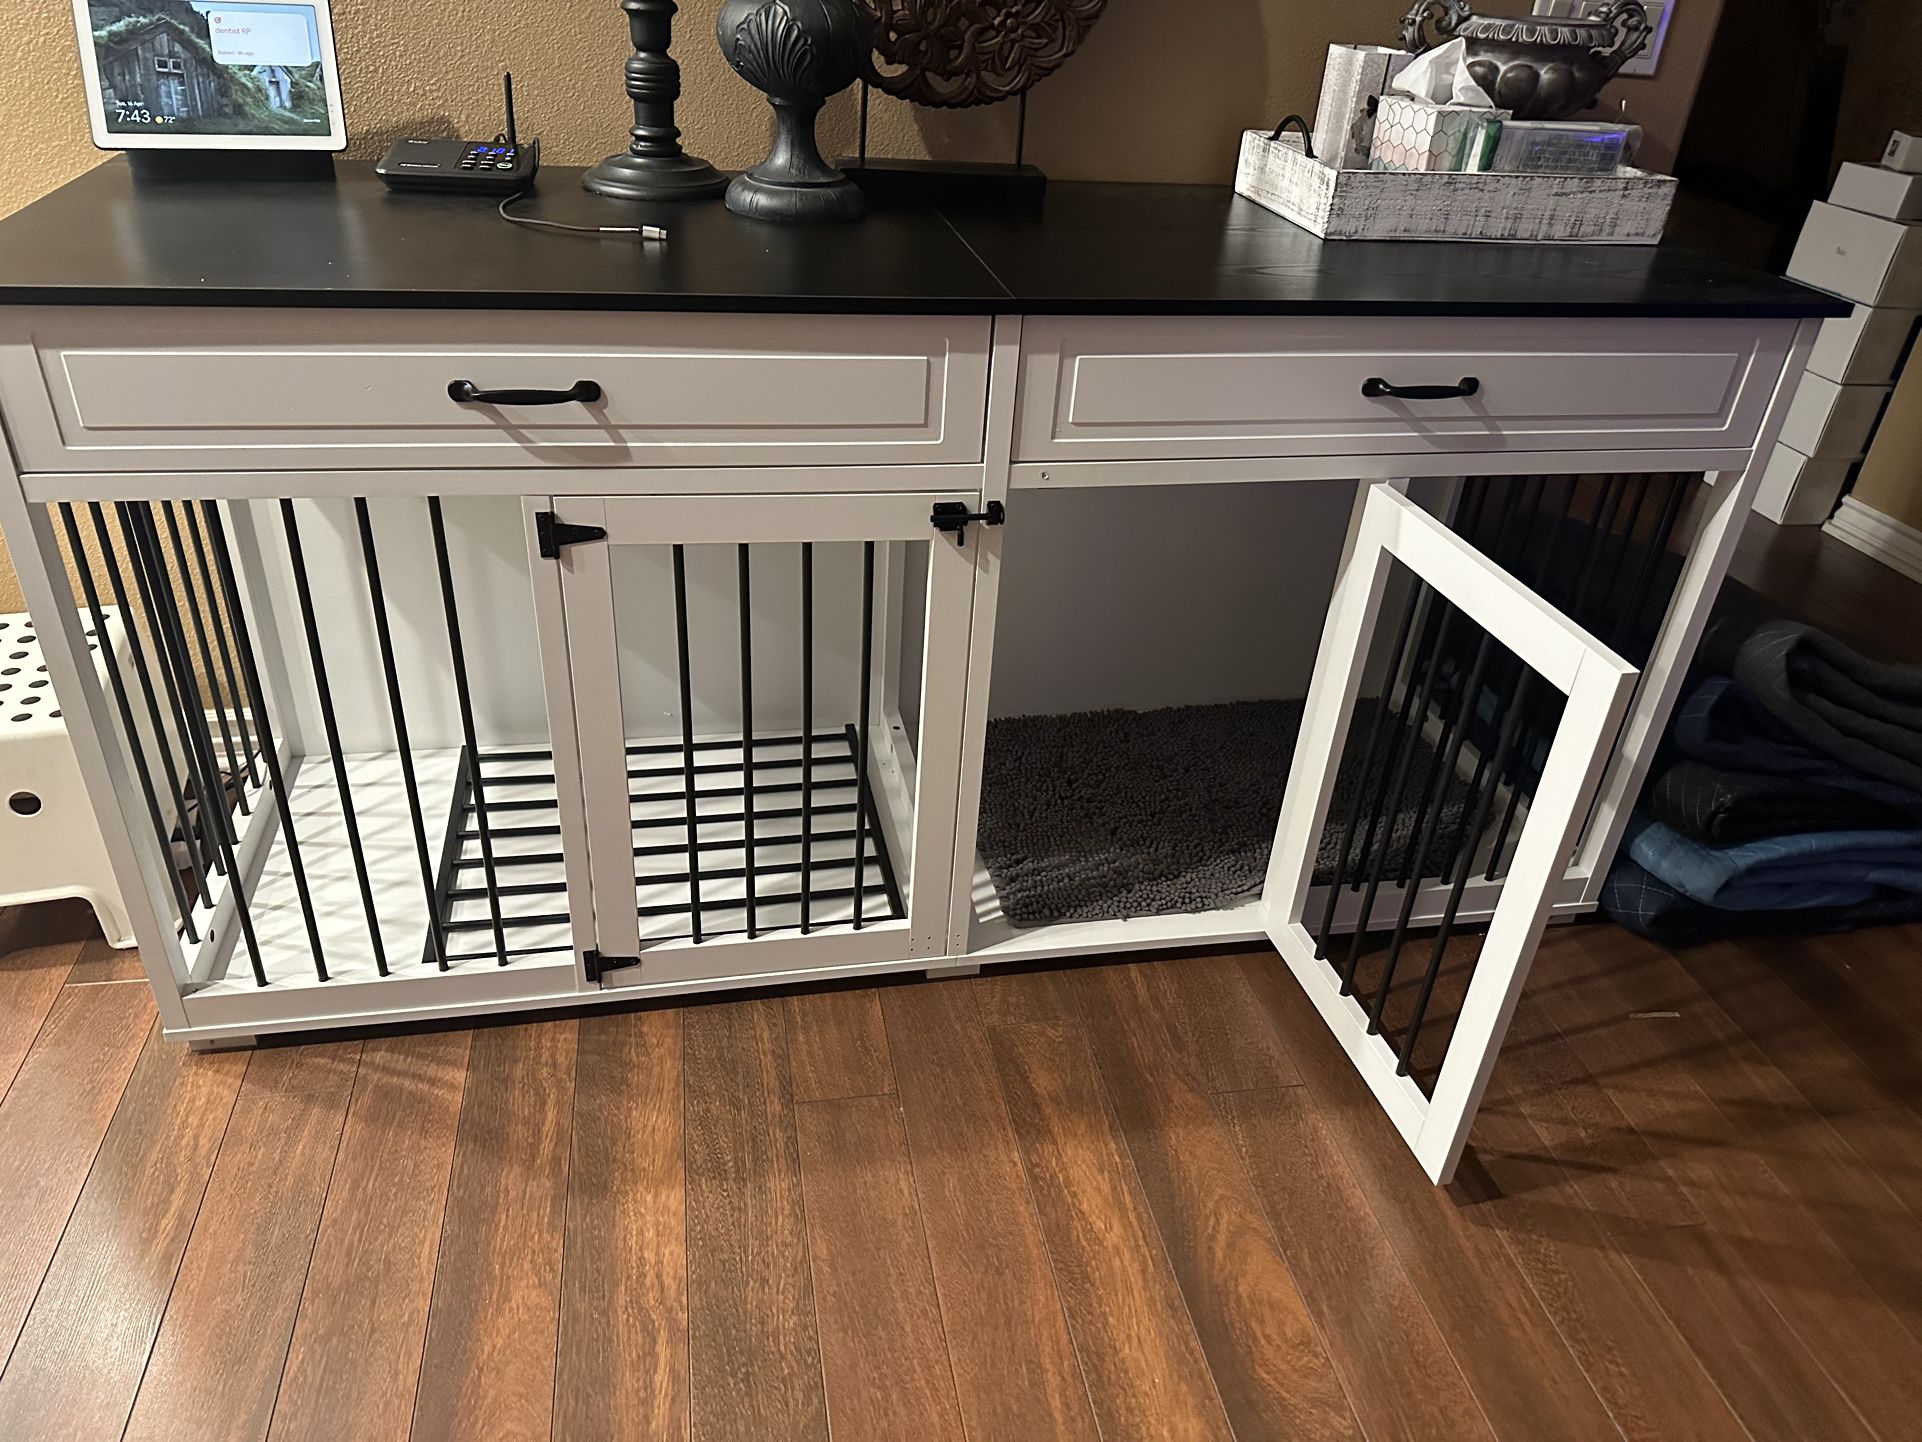 Brand new 2 dog Crate Cabinet